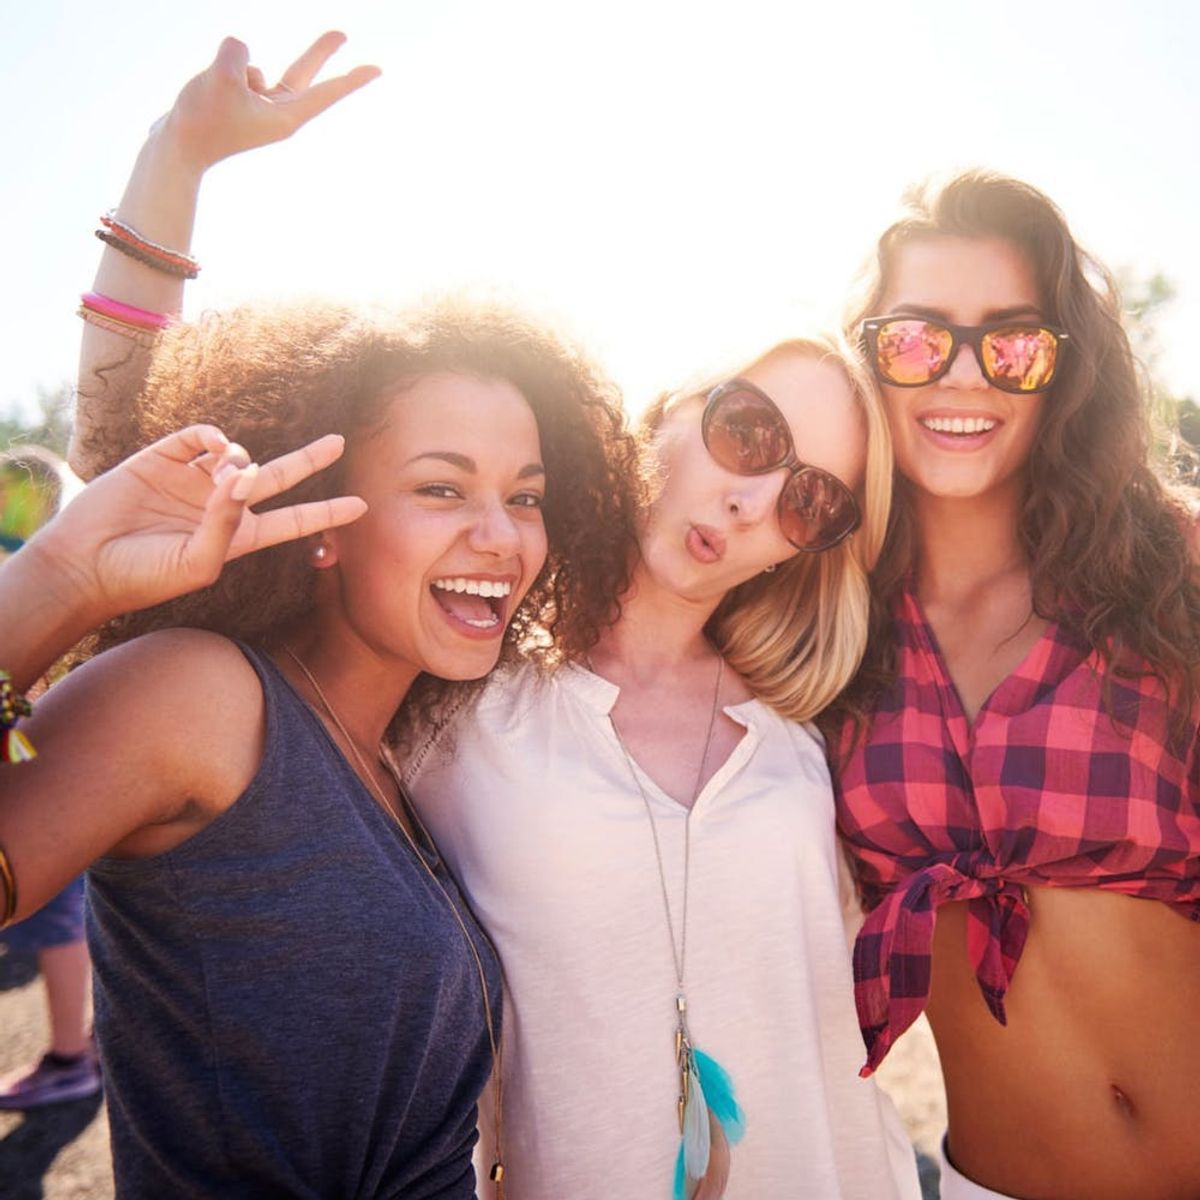 5 Easy Ways to Be Healthy at Coachella and All Summer Music Festivals